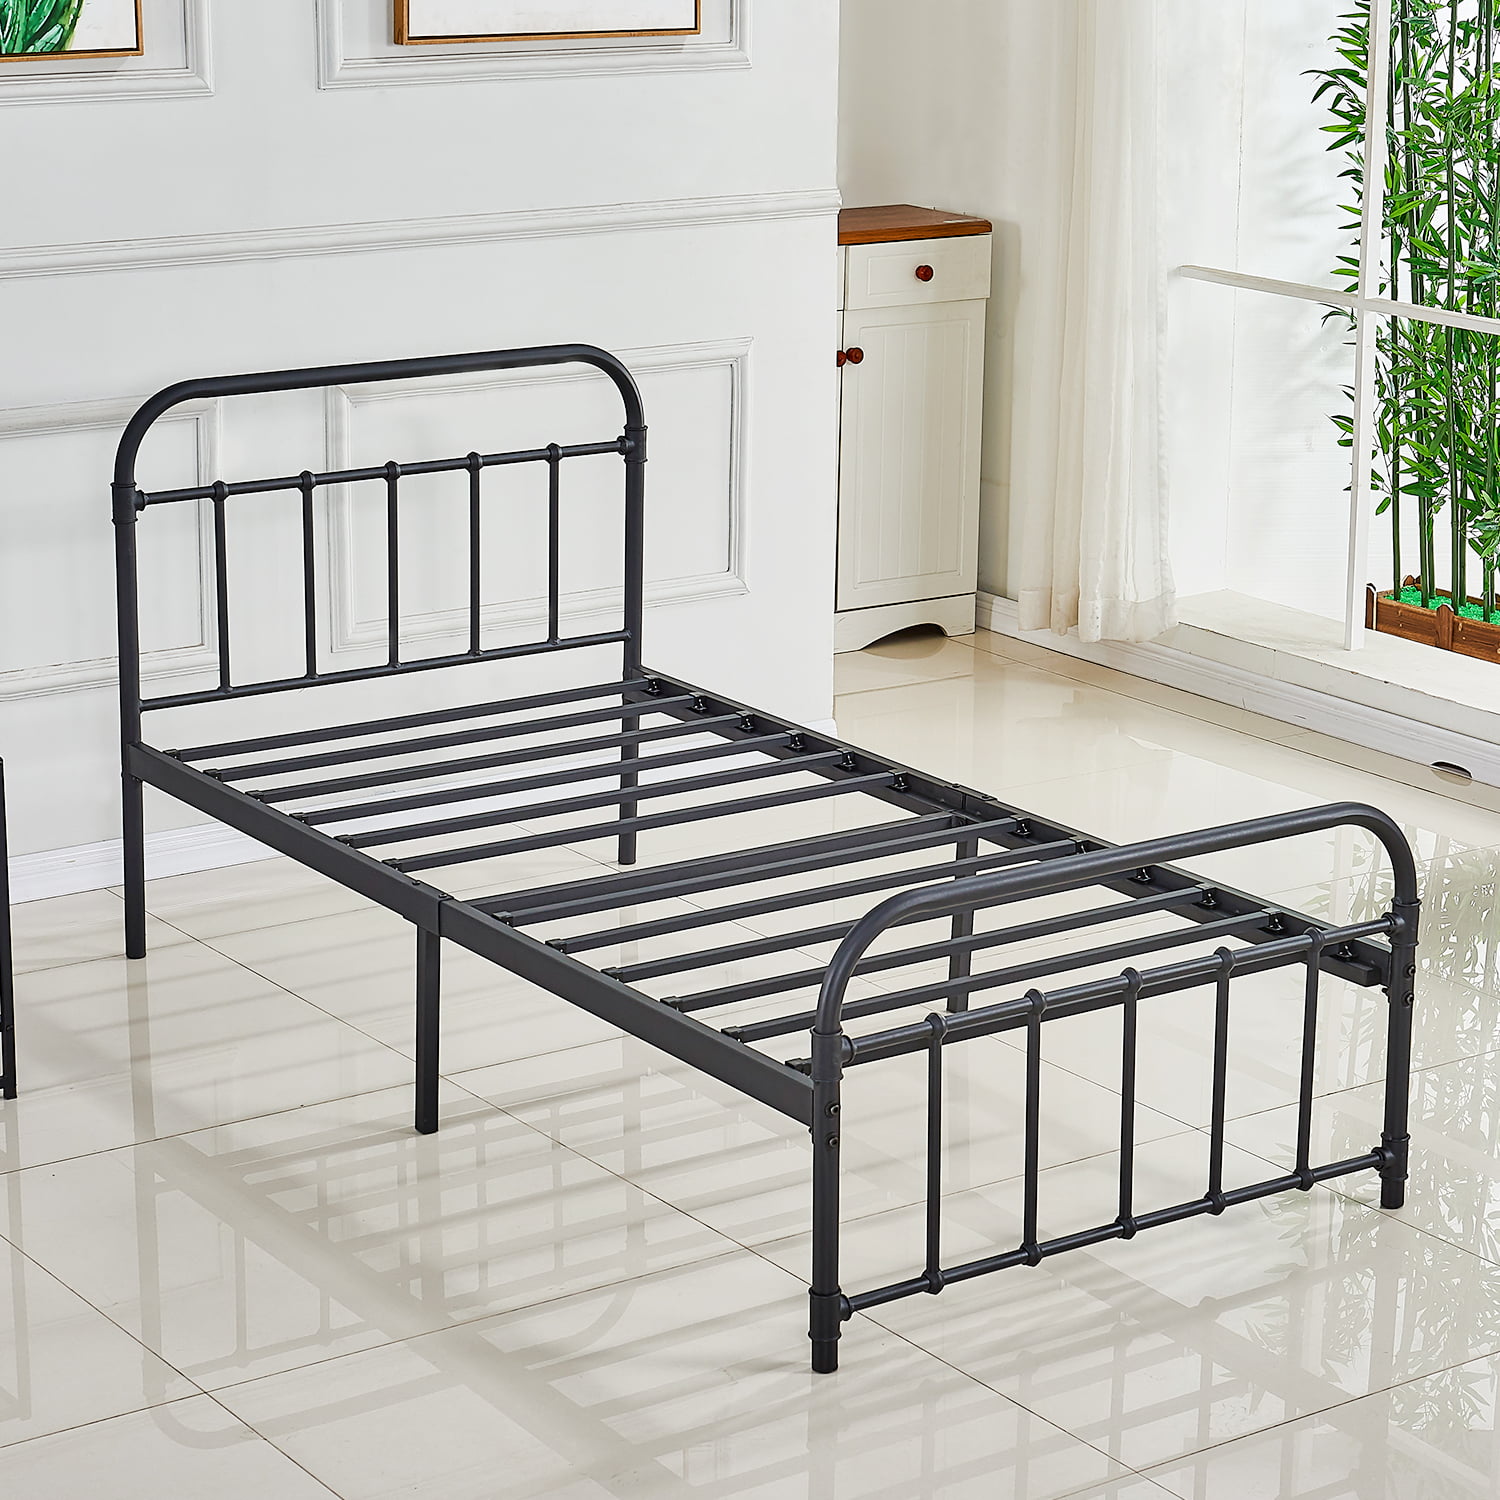 Dikapa Twin Size Bed Frame Base Metal, Bed Frame For Twin Size